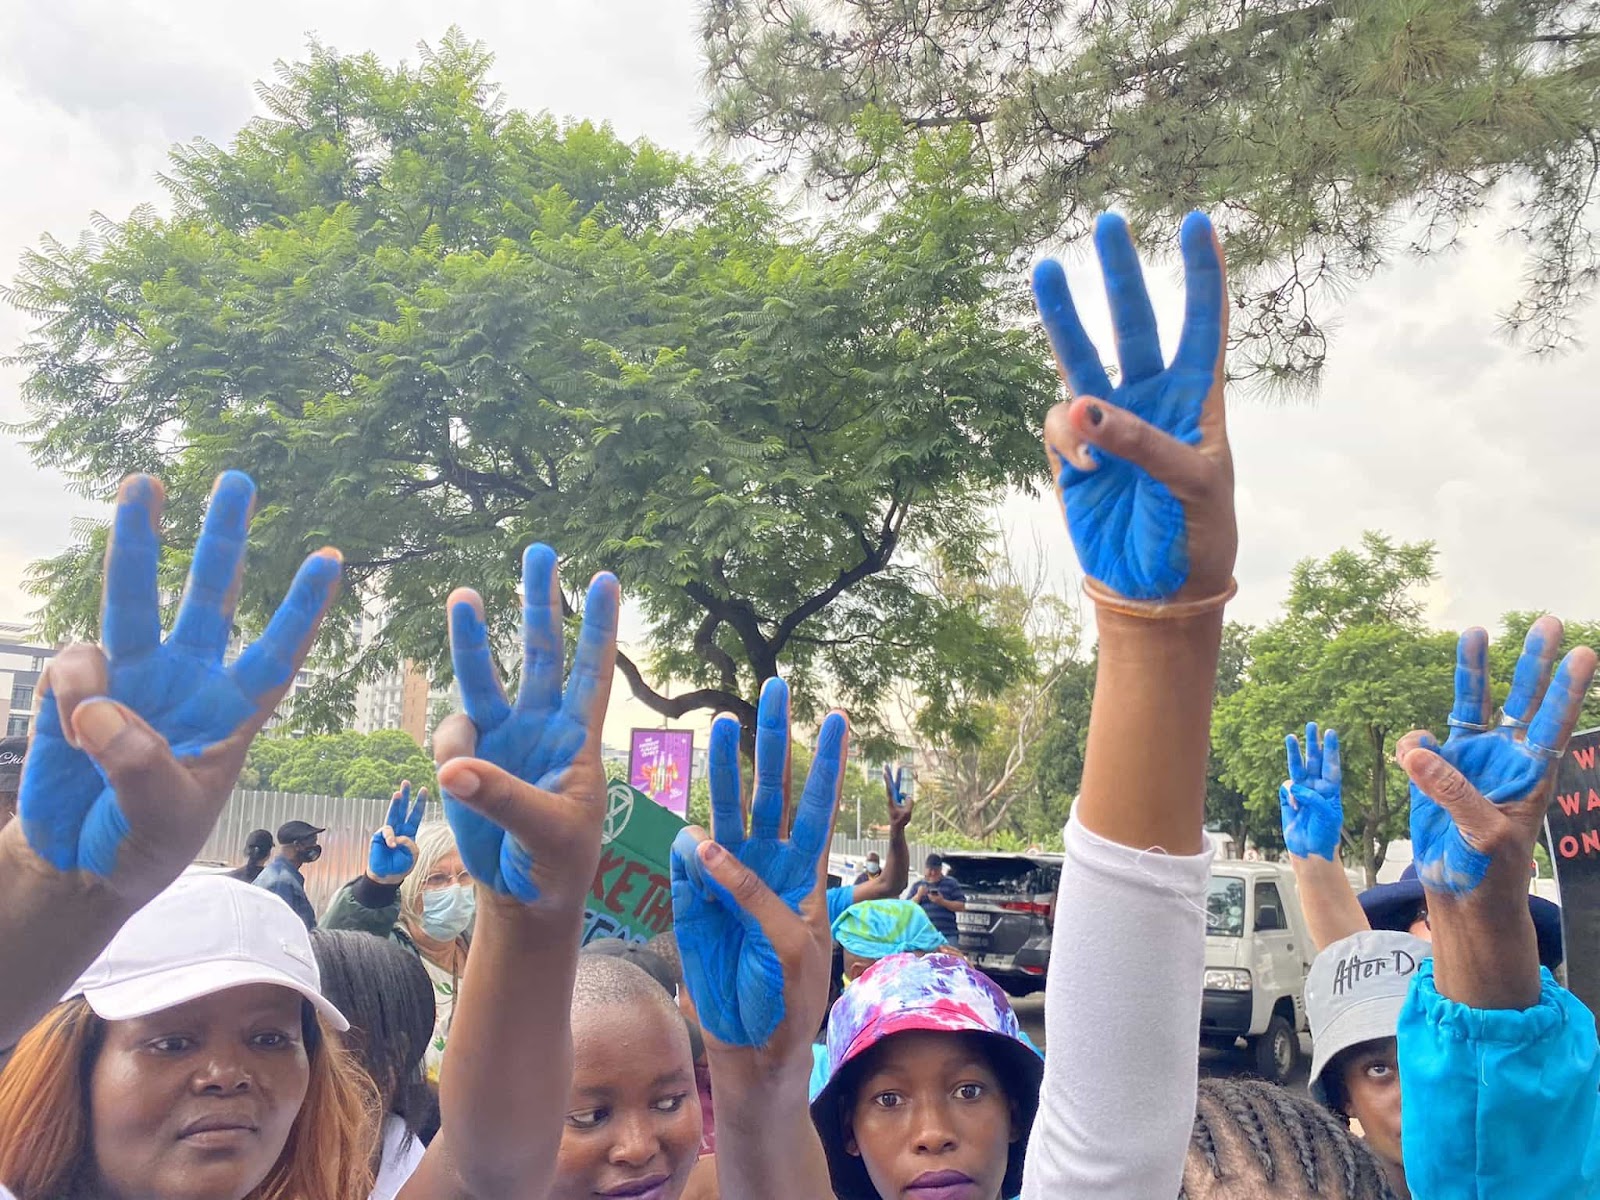 Women look to camera and hold up their hands for a three finger salute, their fingers daubed in bright blue paint